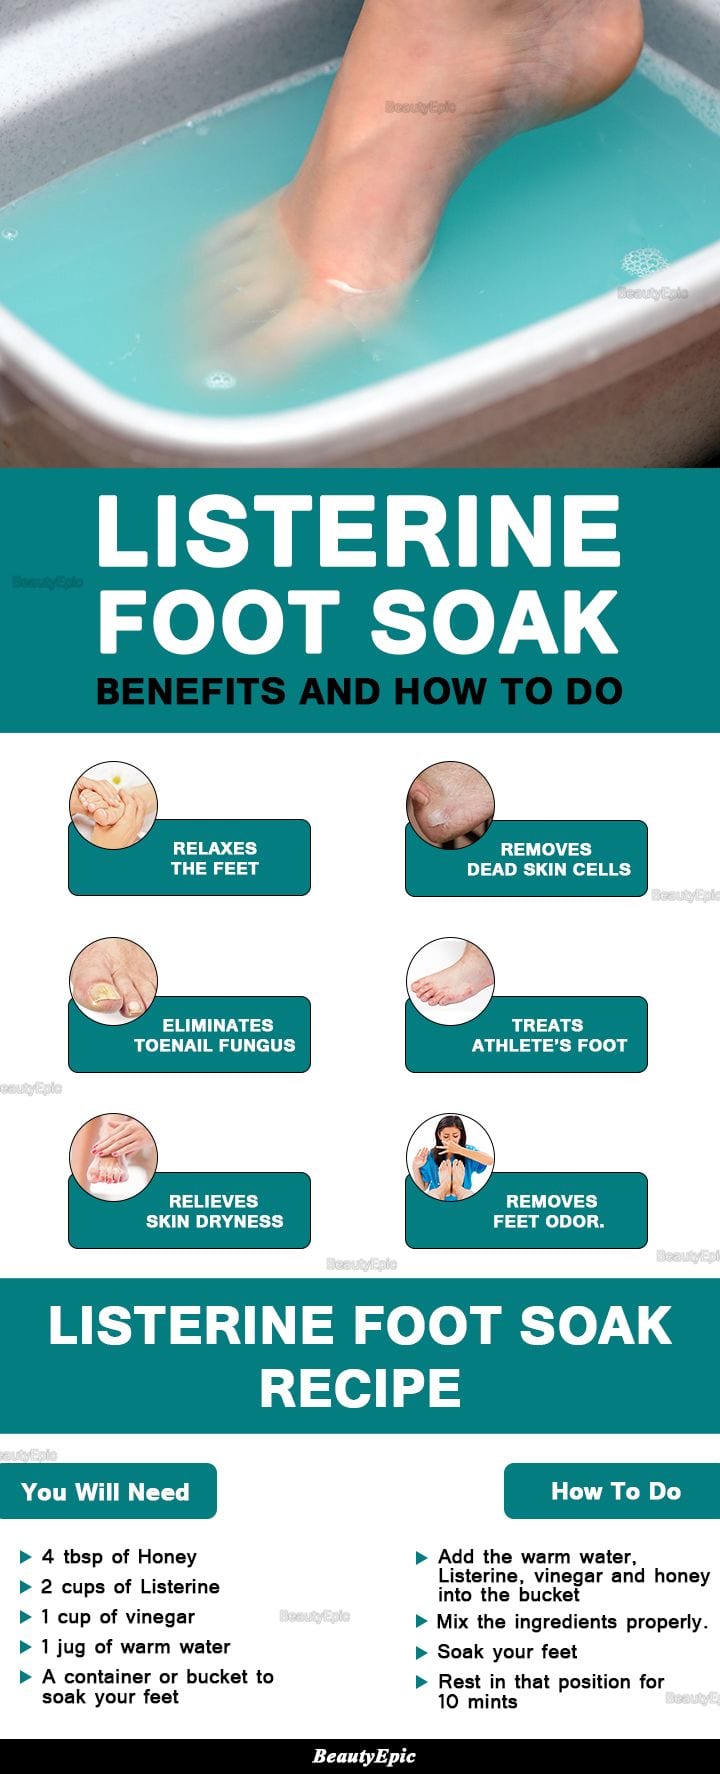 [ad_1]

Listerine Foot Soak Benefits and How to Do
Source by s9882
[ad_2]
			
			…